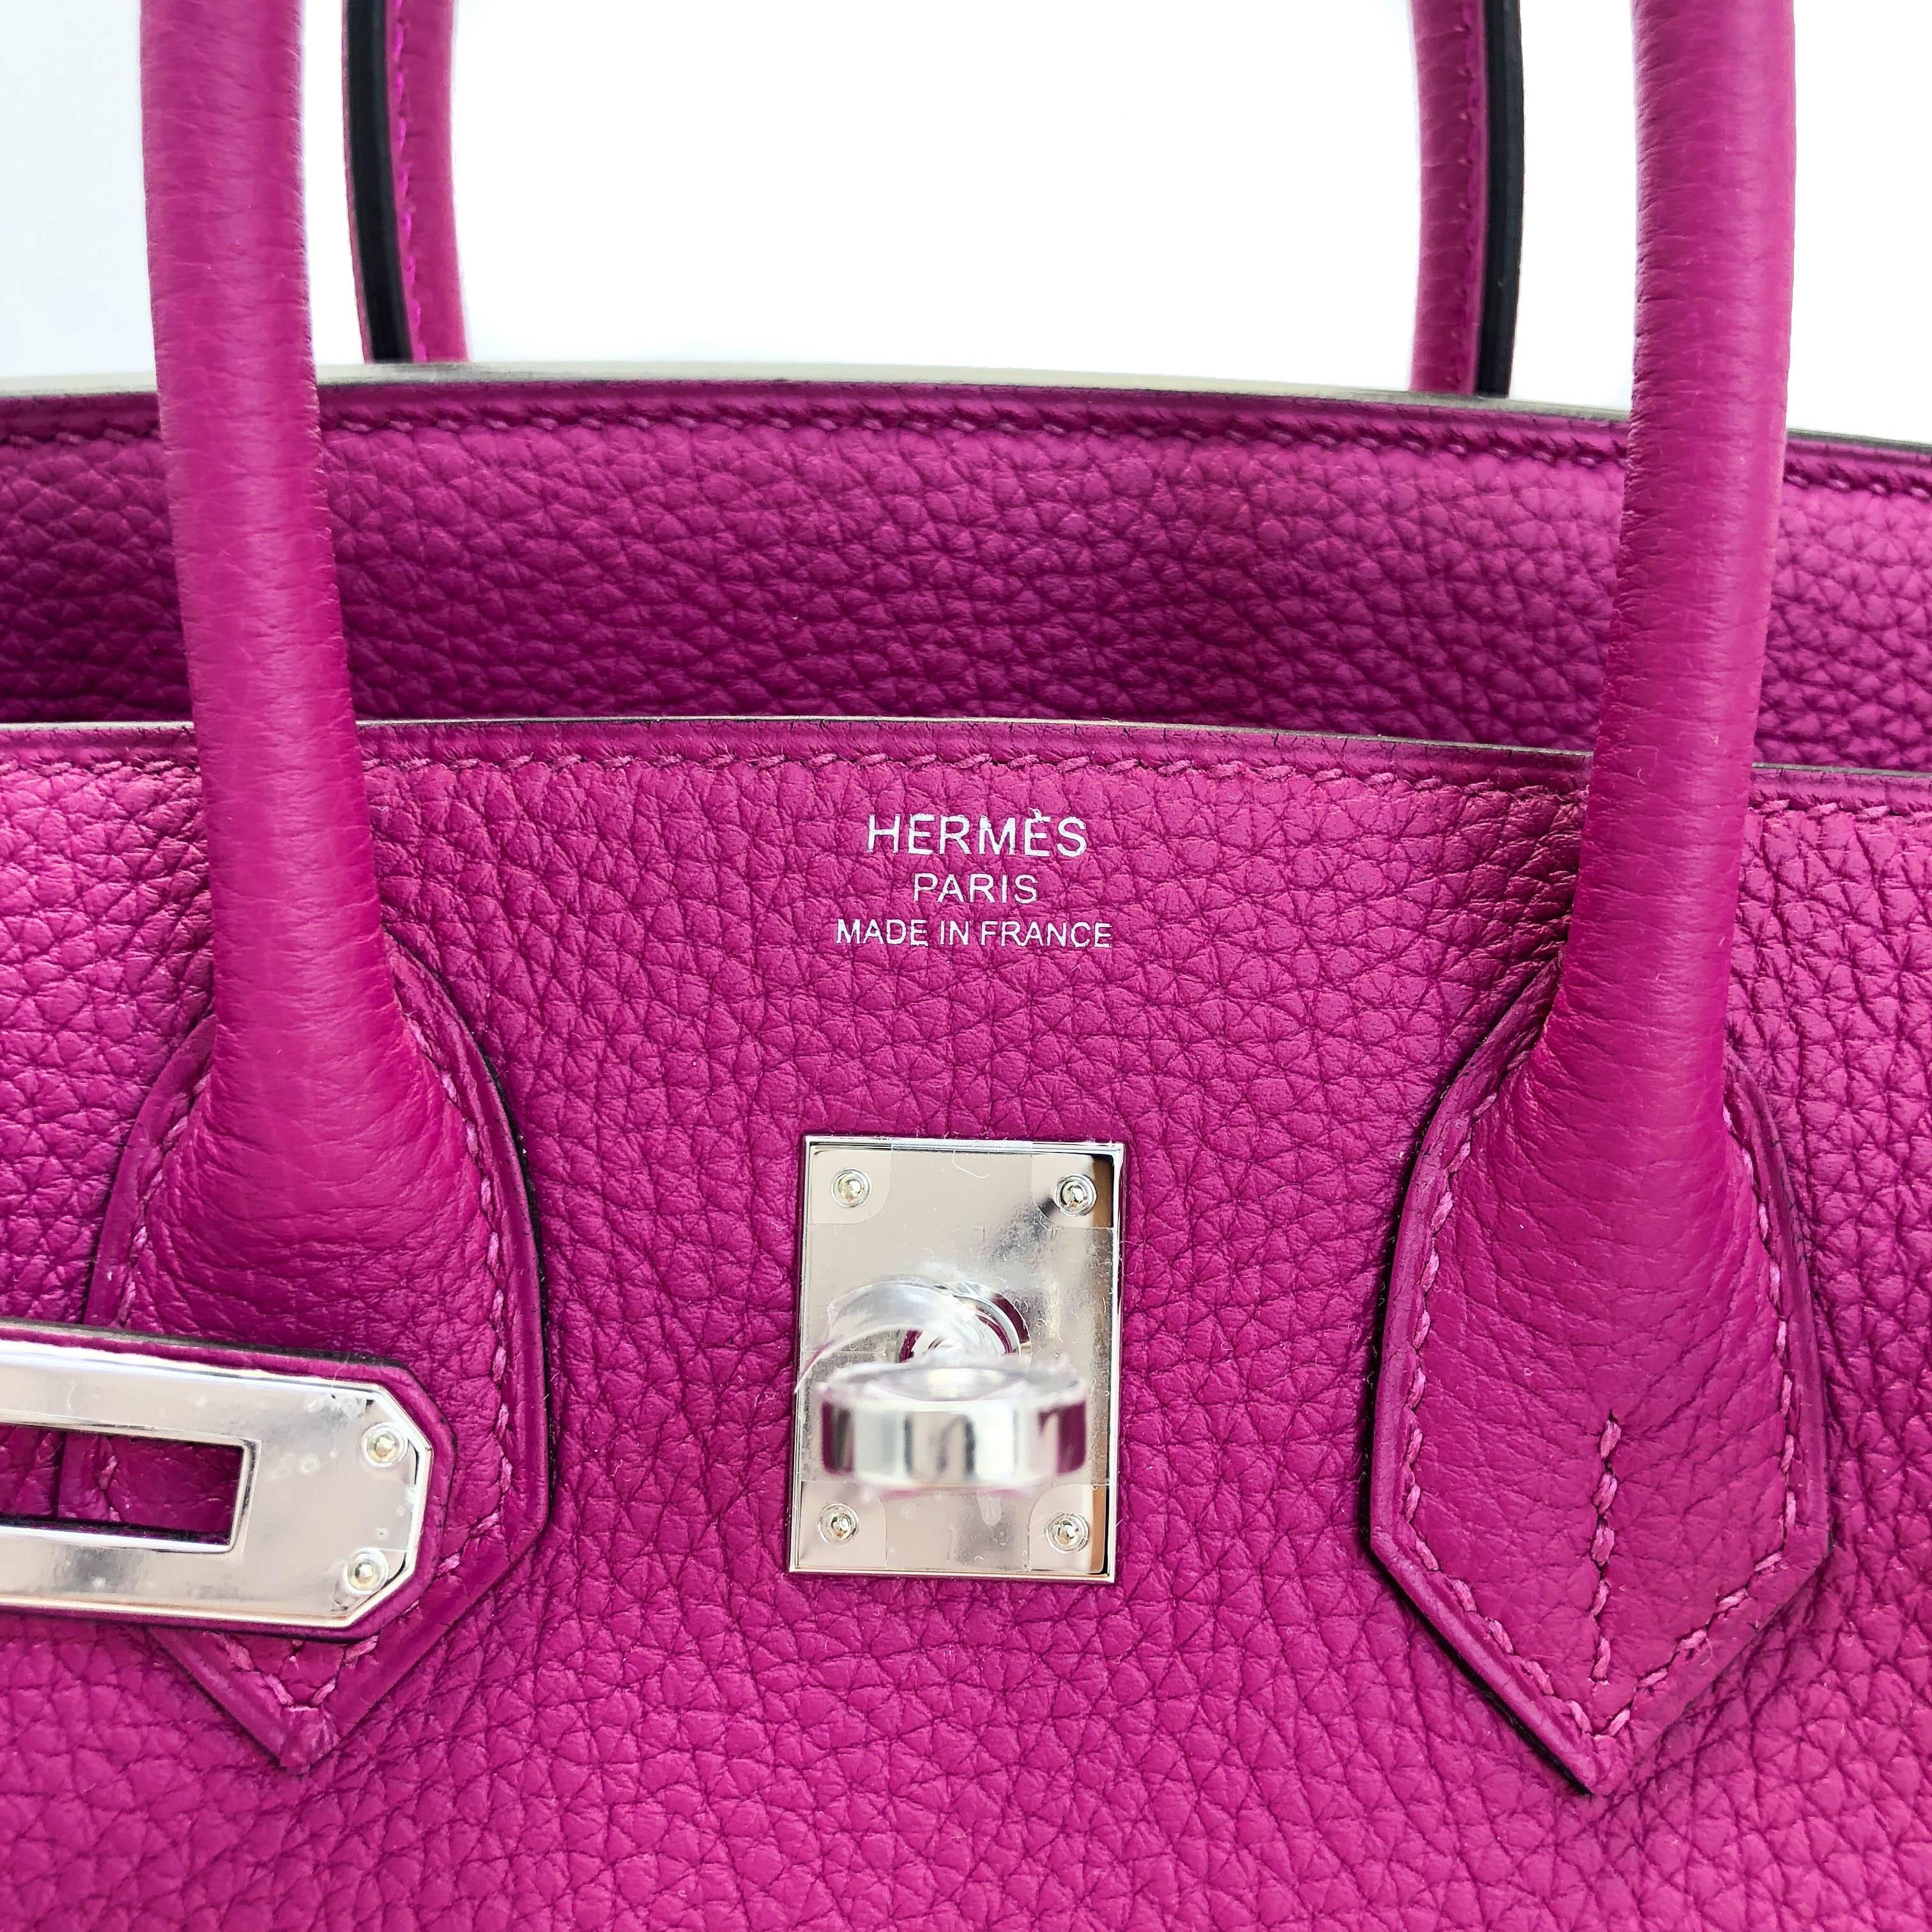 Truly the most iconic bag on the market, this Hermes Birkin 25 Rouge Pourpre with Palladium Hardware is guaranteed to catch attention with its adorable size and classic construction. Guaranteed 100% authentic

Condition: Never been used 

BIRKIN IS